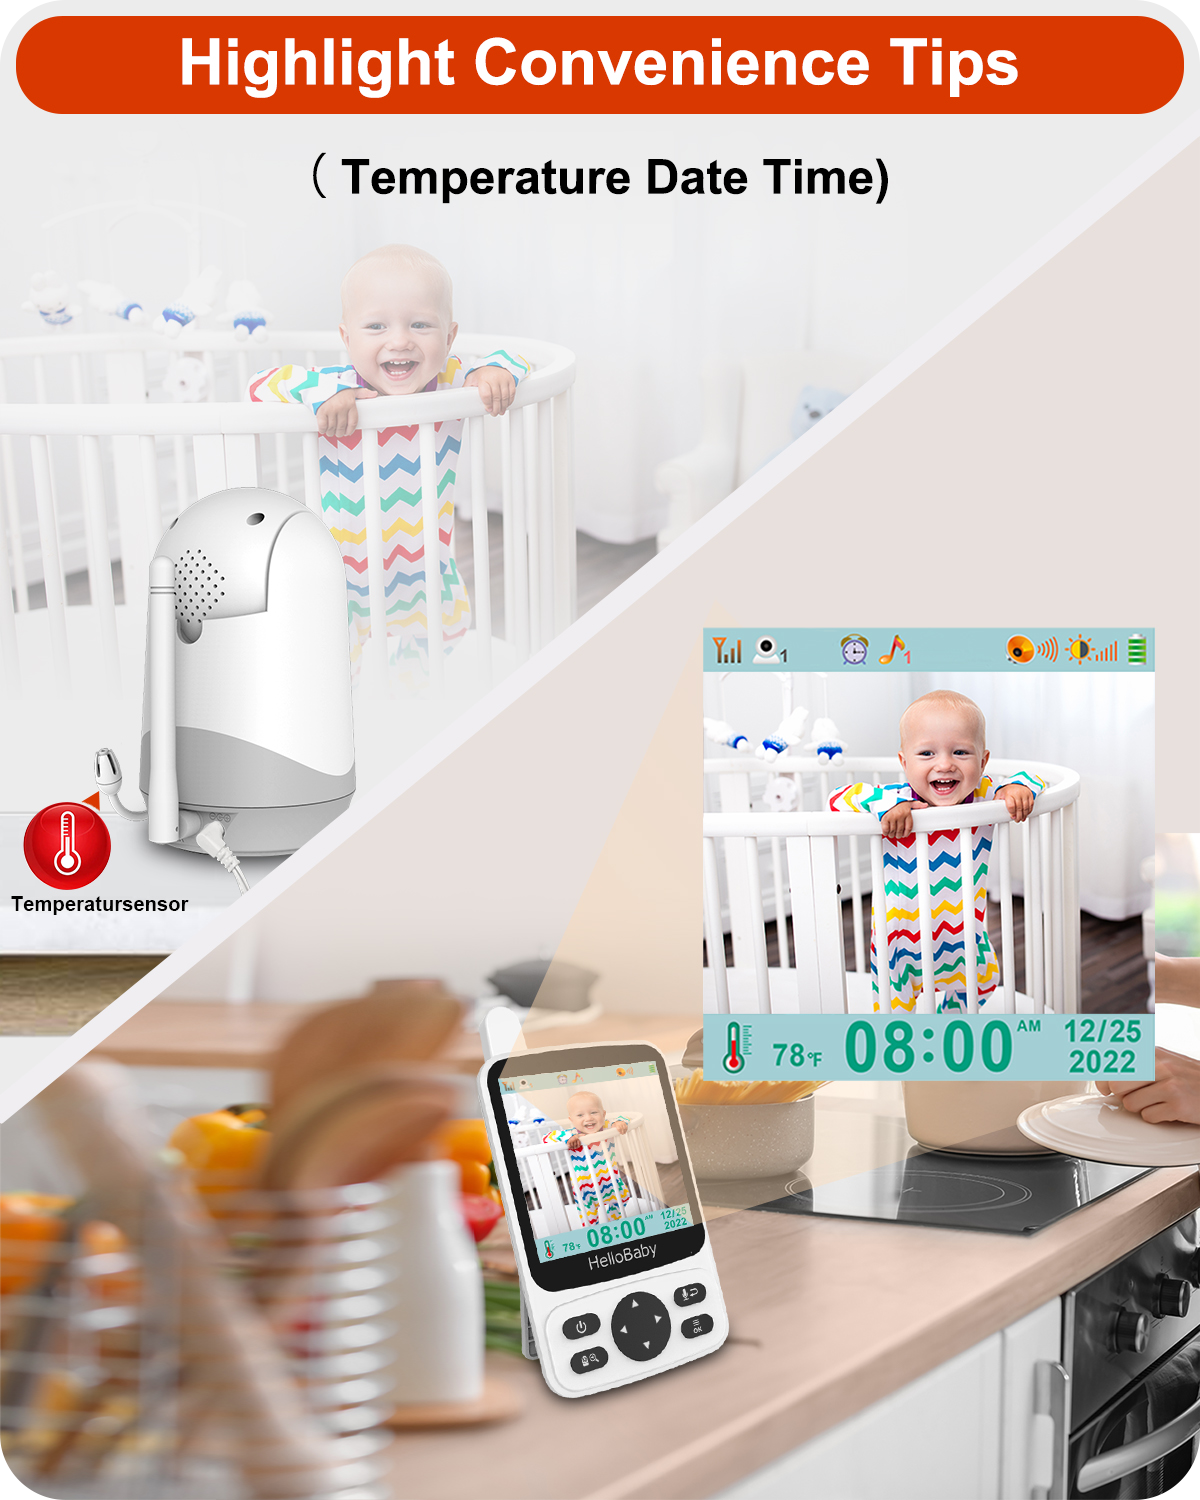  HelloBaby Monitor with Camera and Audio, IPS